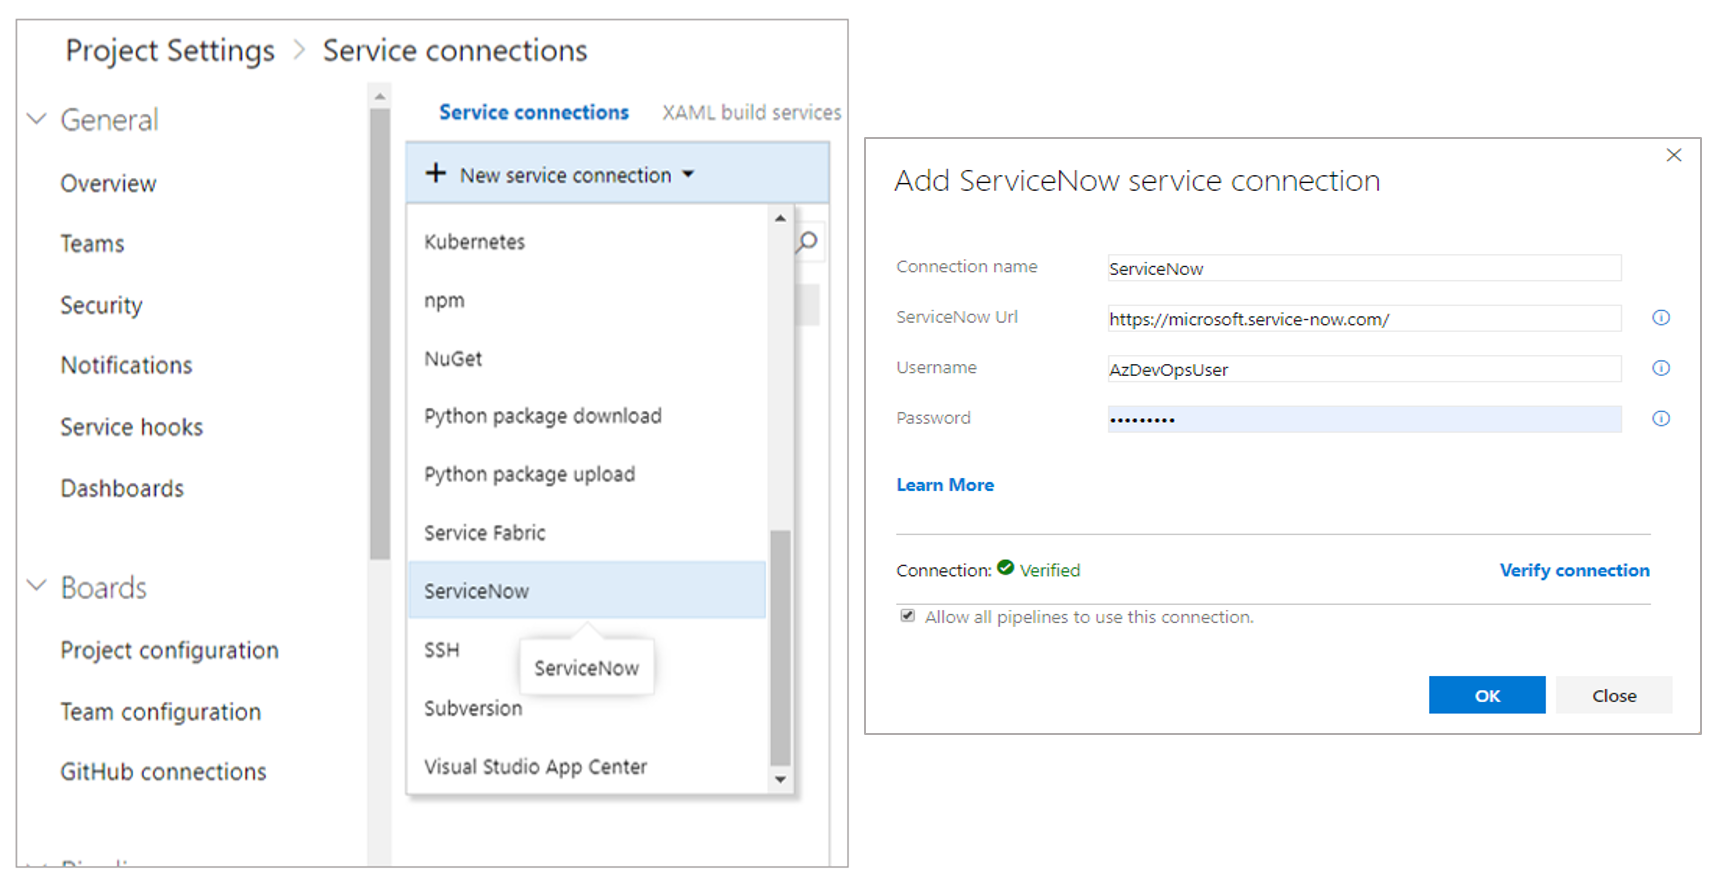 ServiceNow connection